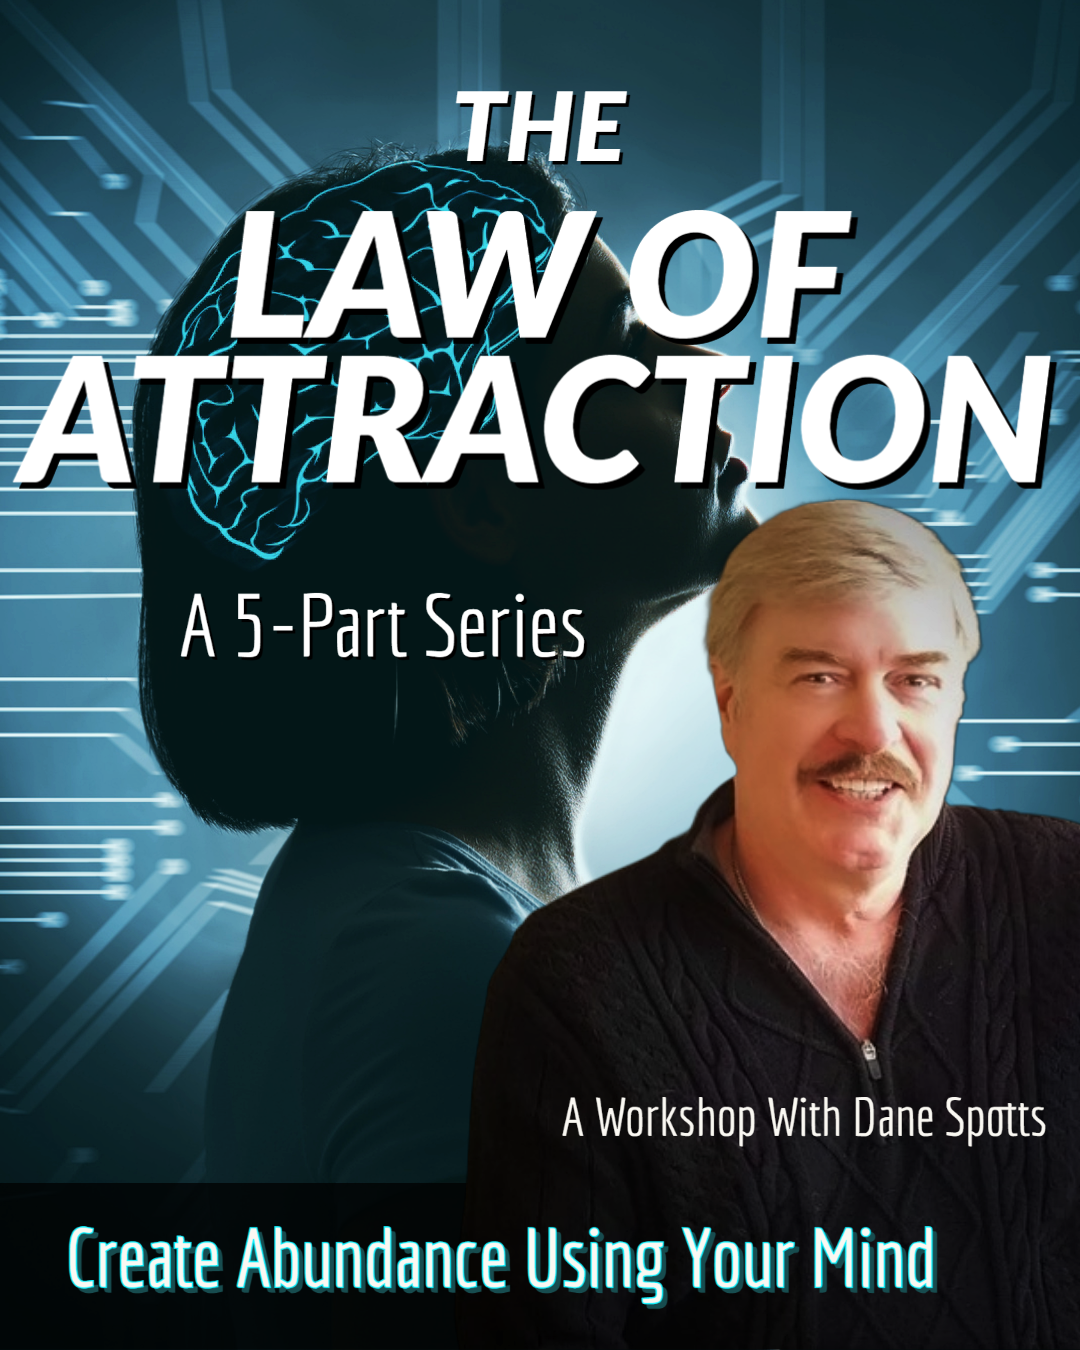 Law-of-Attraction-thumb